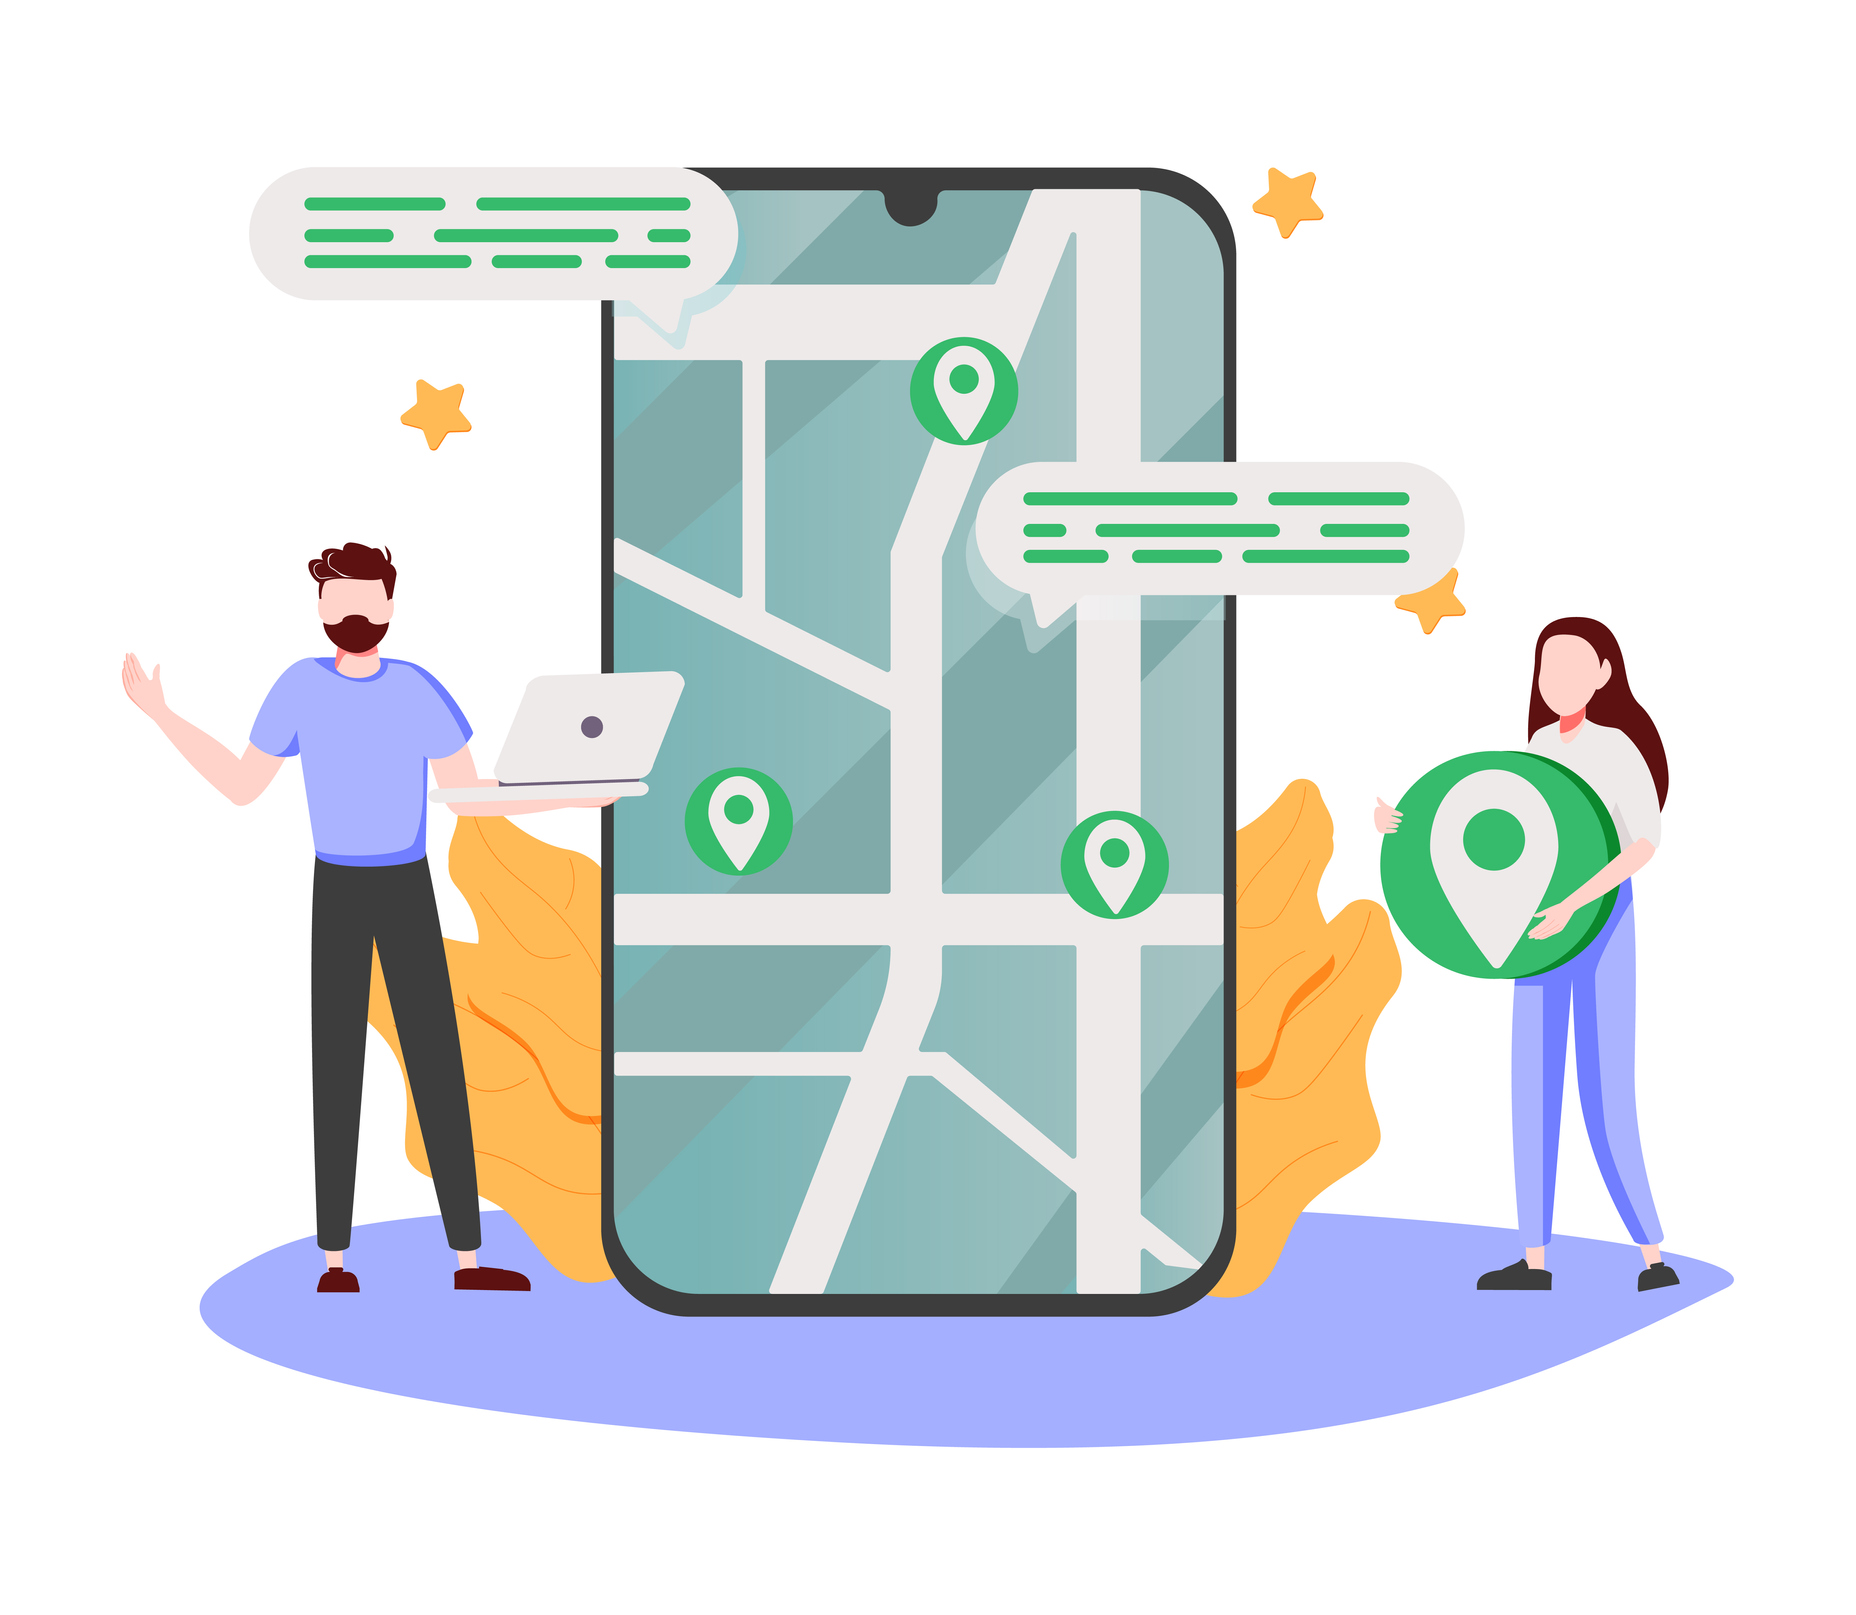 Abstract concept vector illustration featuring a team performing SEO analytics for local businesses with multiple locations.